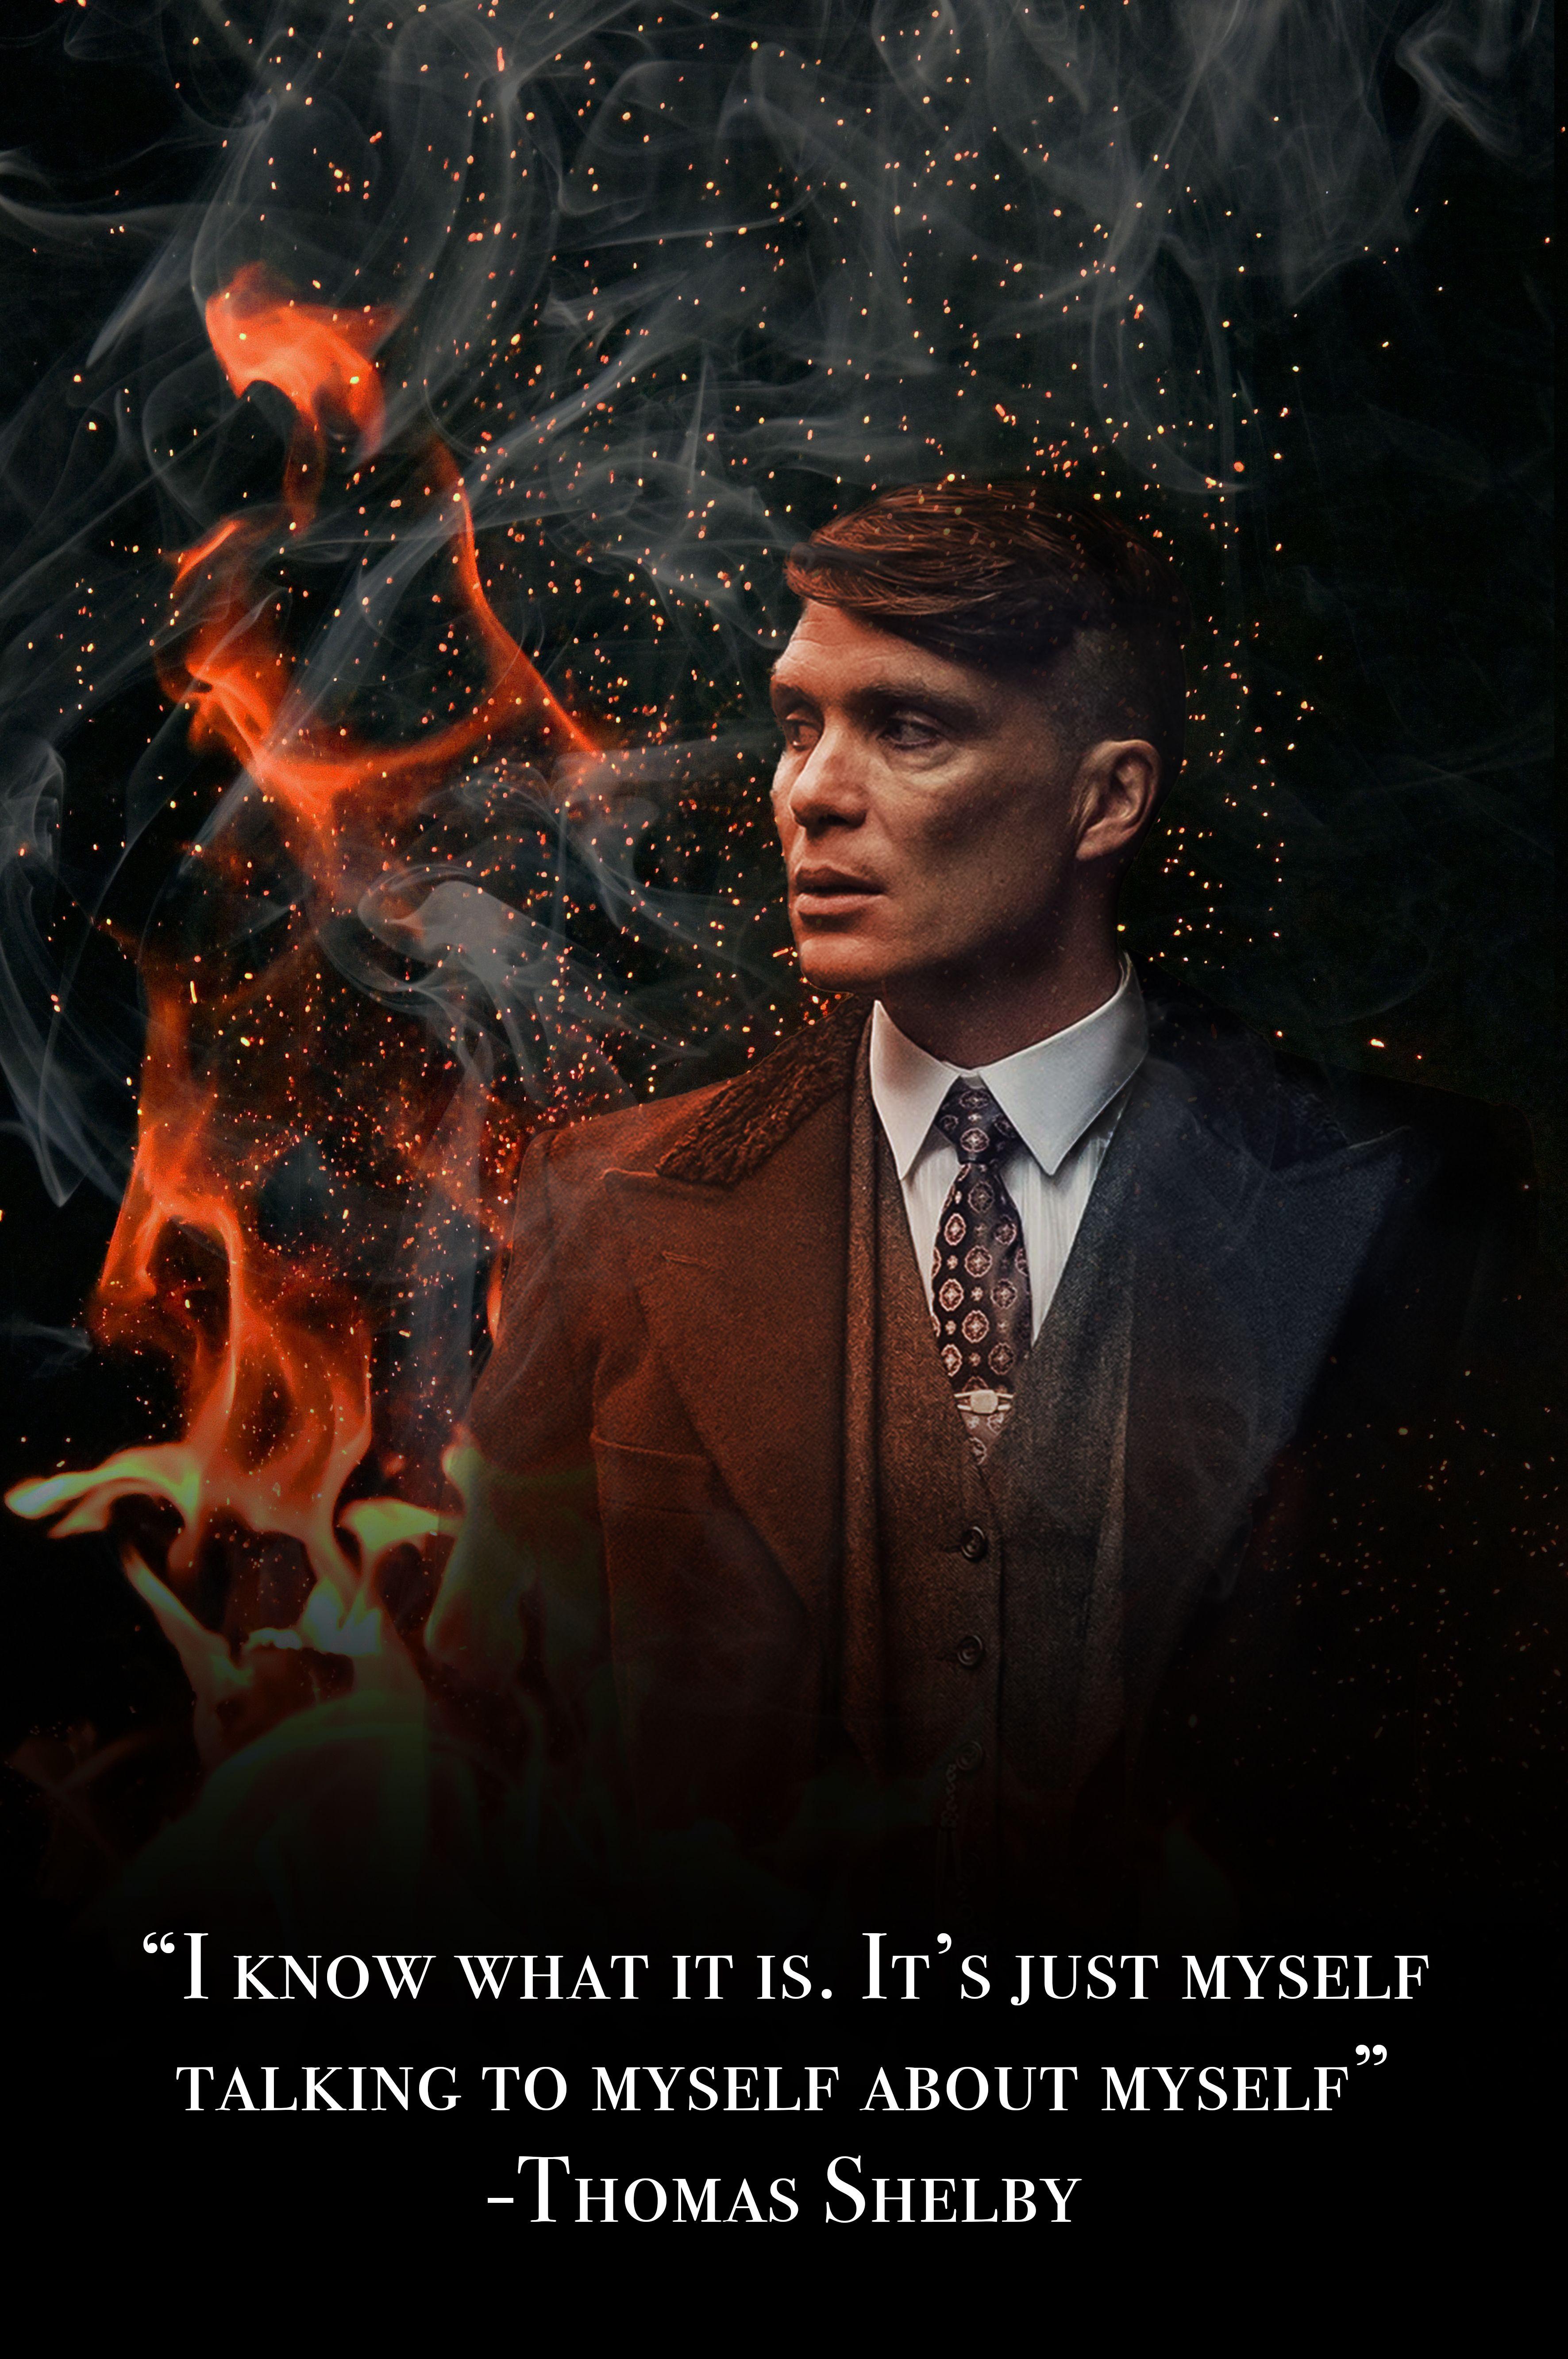 Thomas Shelby Quotes Wallpapers - Top Free Thomas Shelby Quotes Backgrounds  - WallpaperAccess